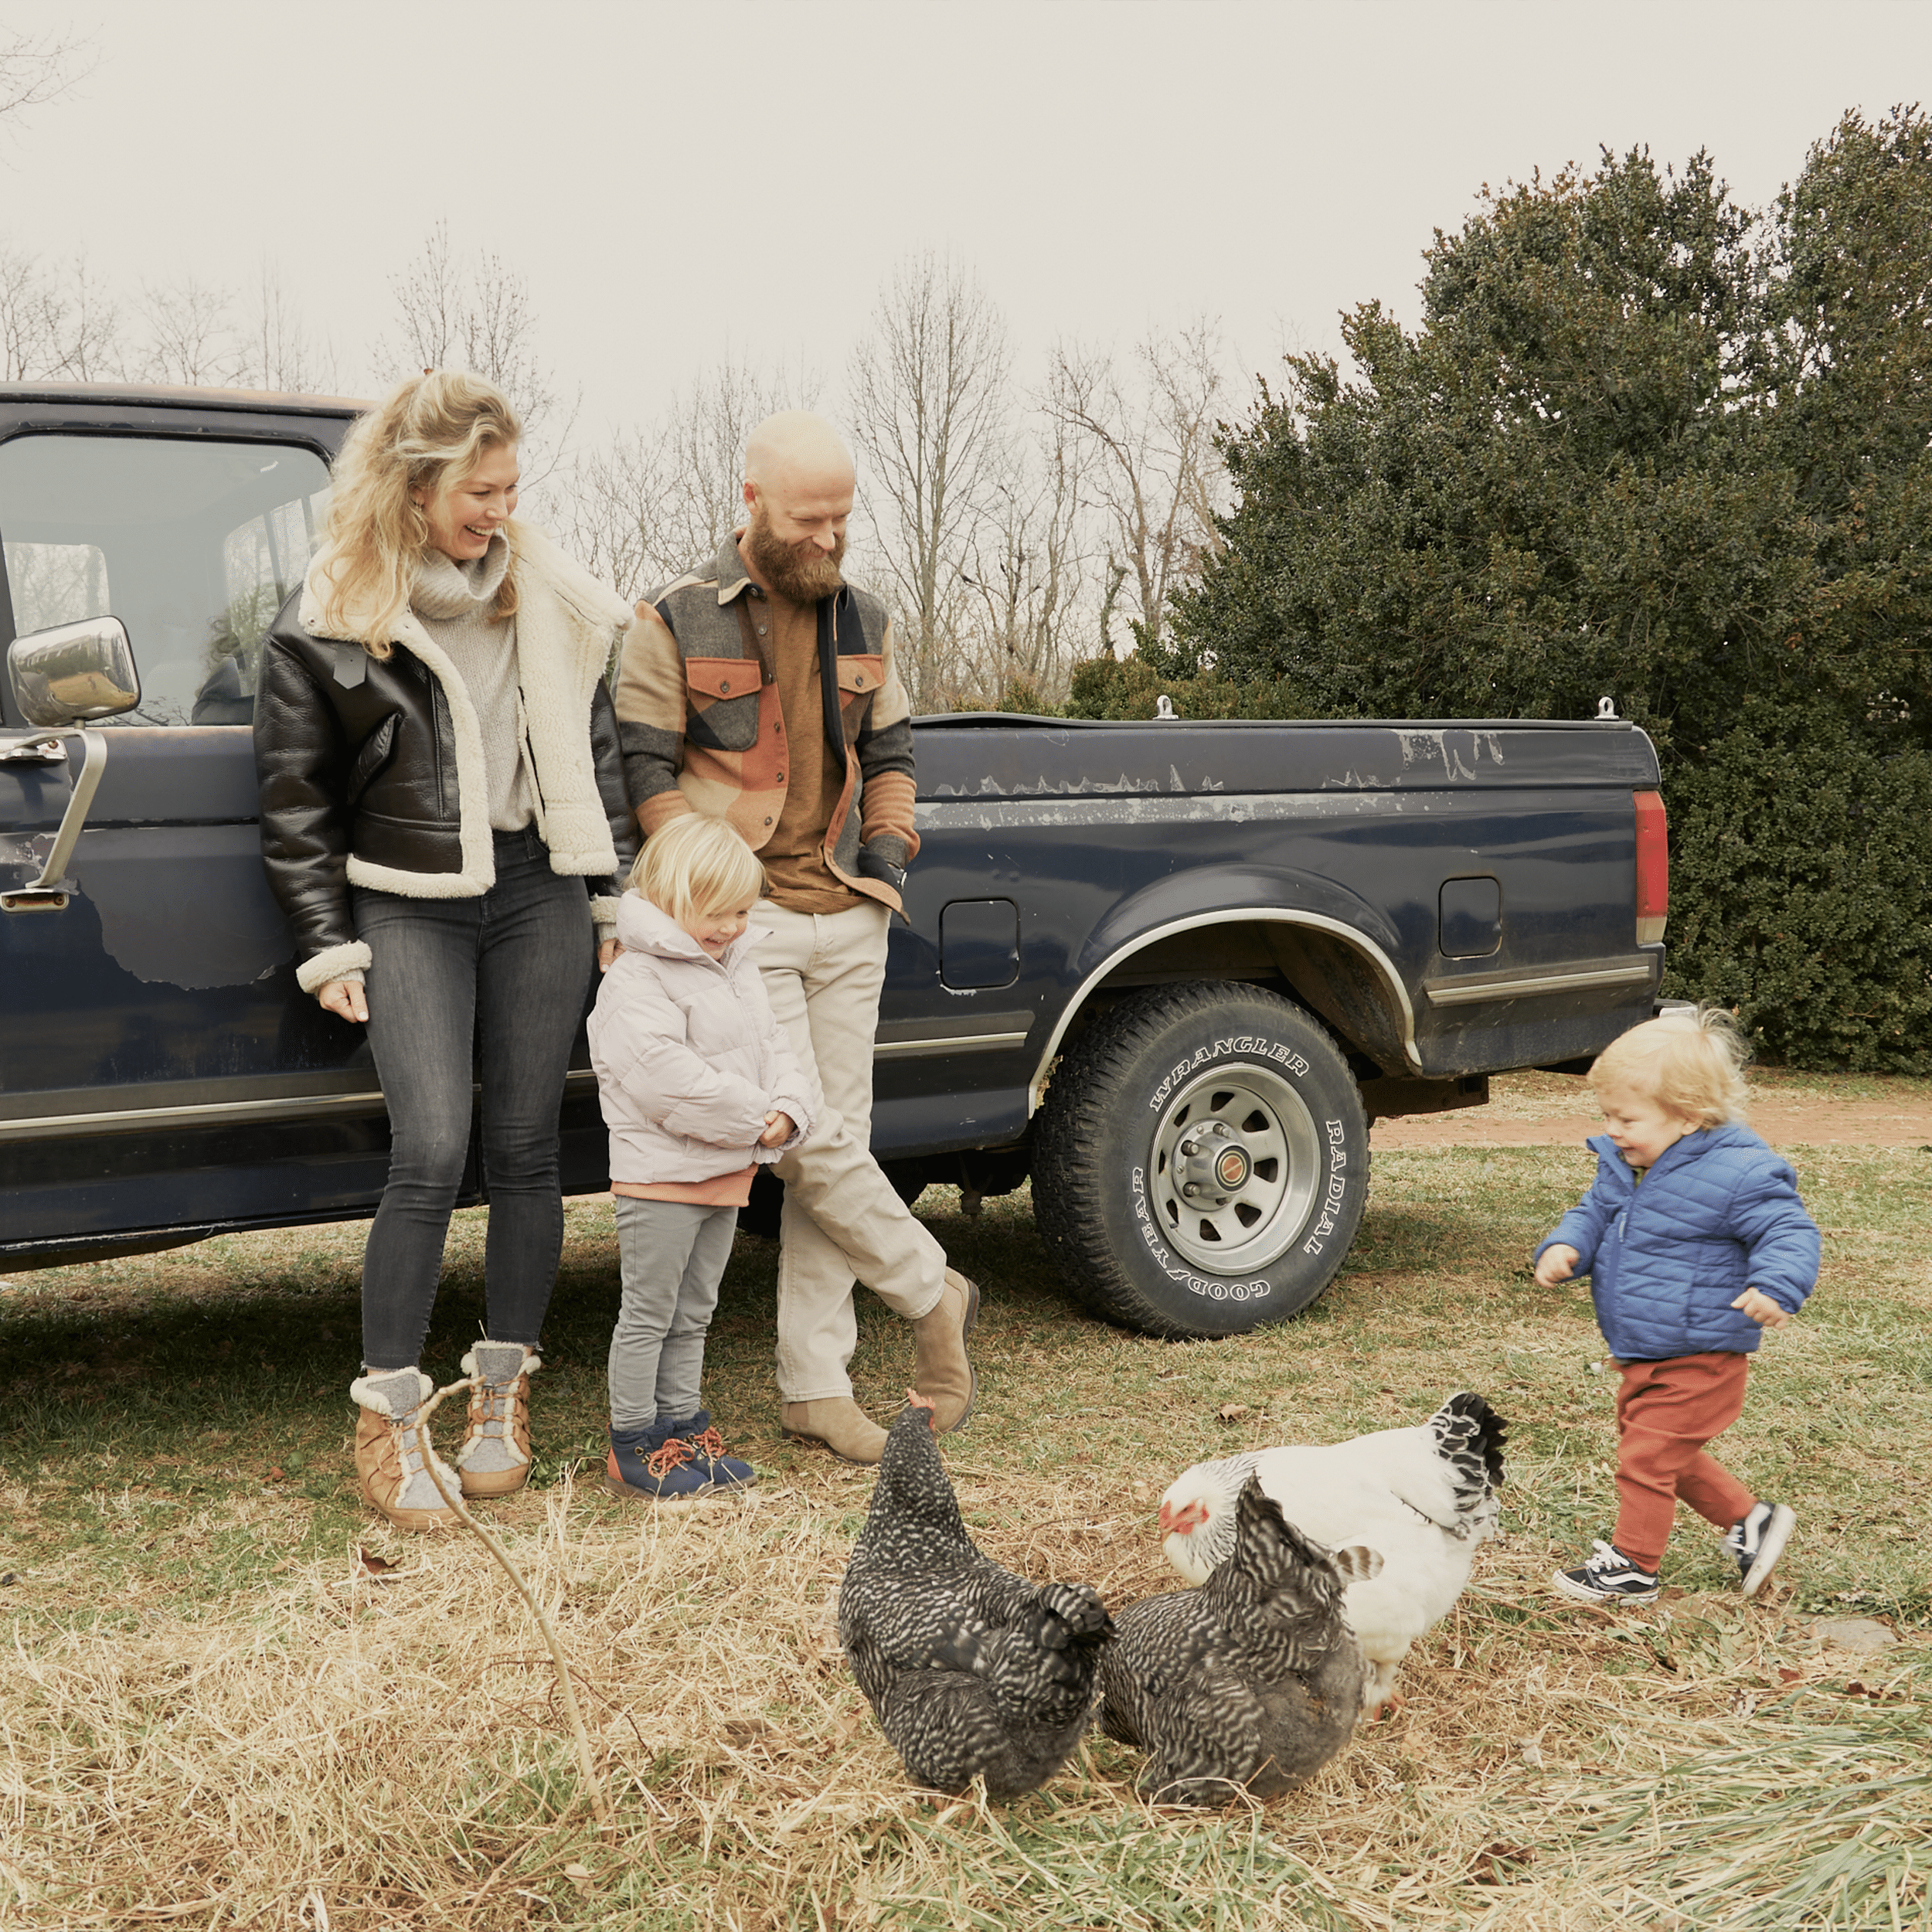 Dr. Joel Butterworth and his family playing with chickens